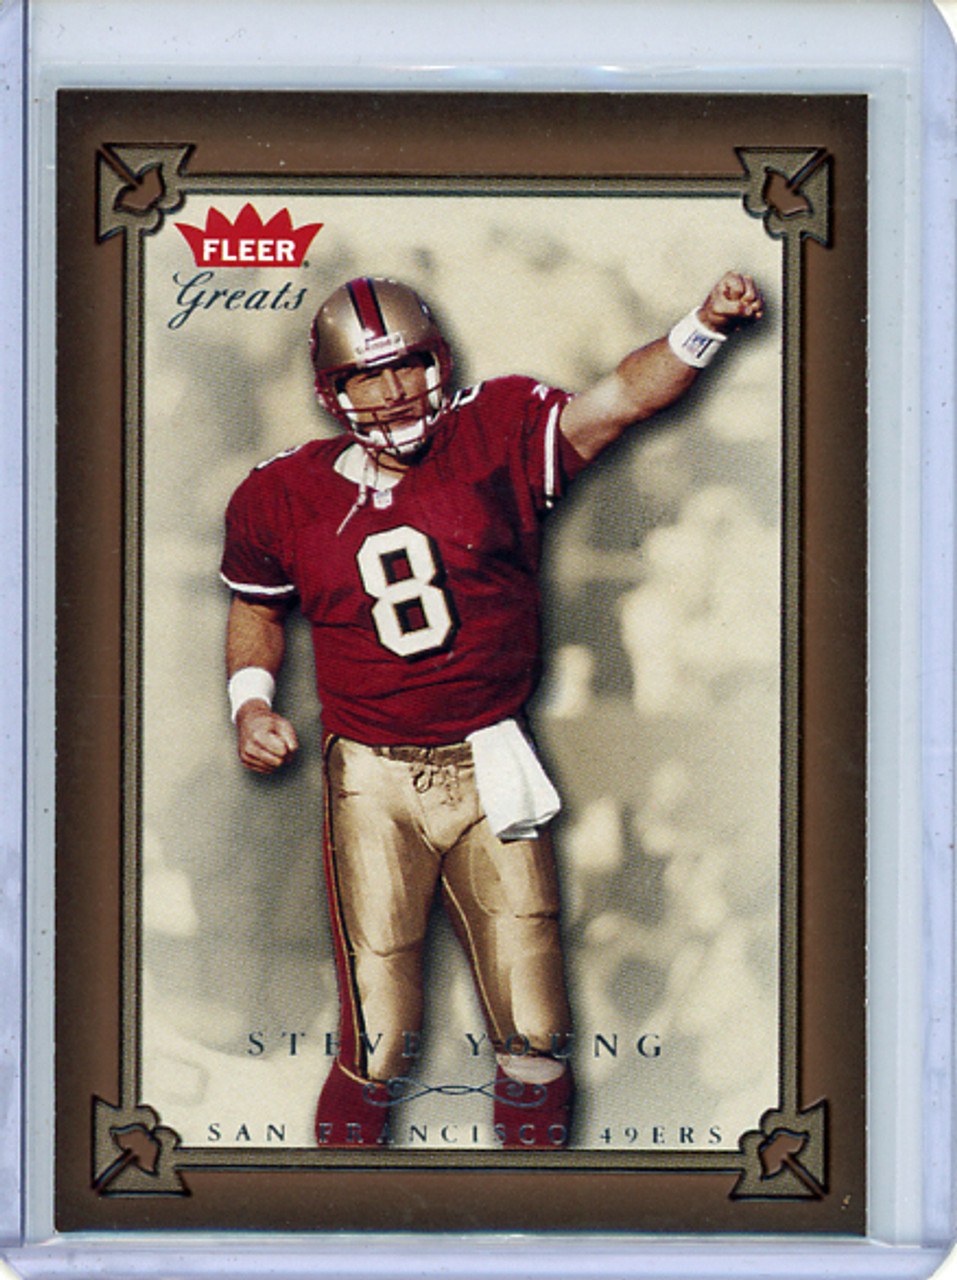 Steve Young 2004 Fleer Greats of the Game #15 (CQ)